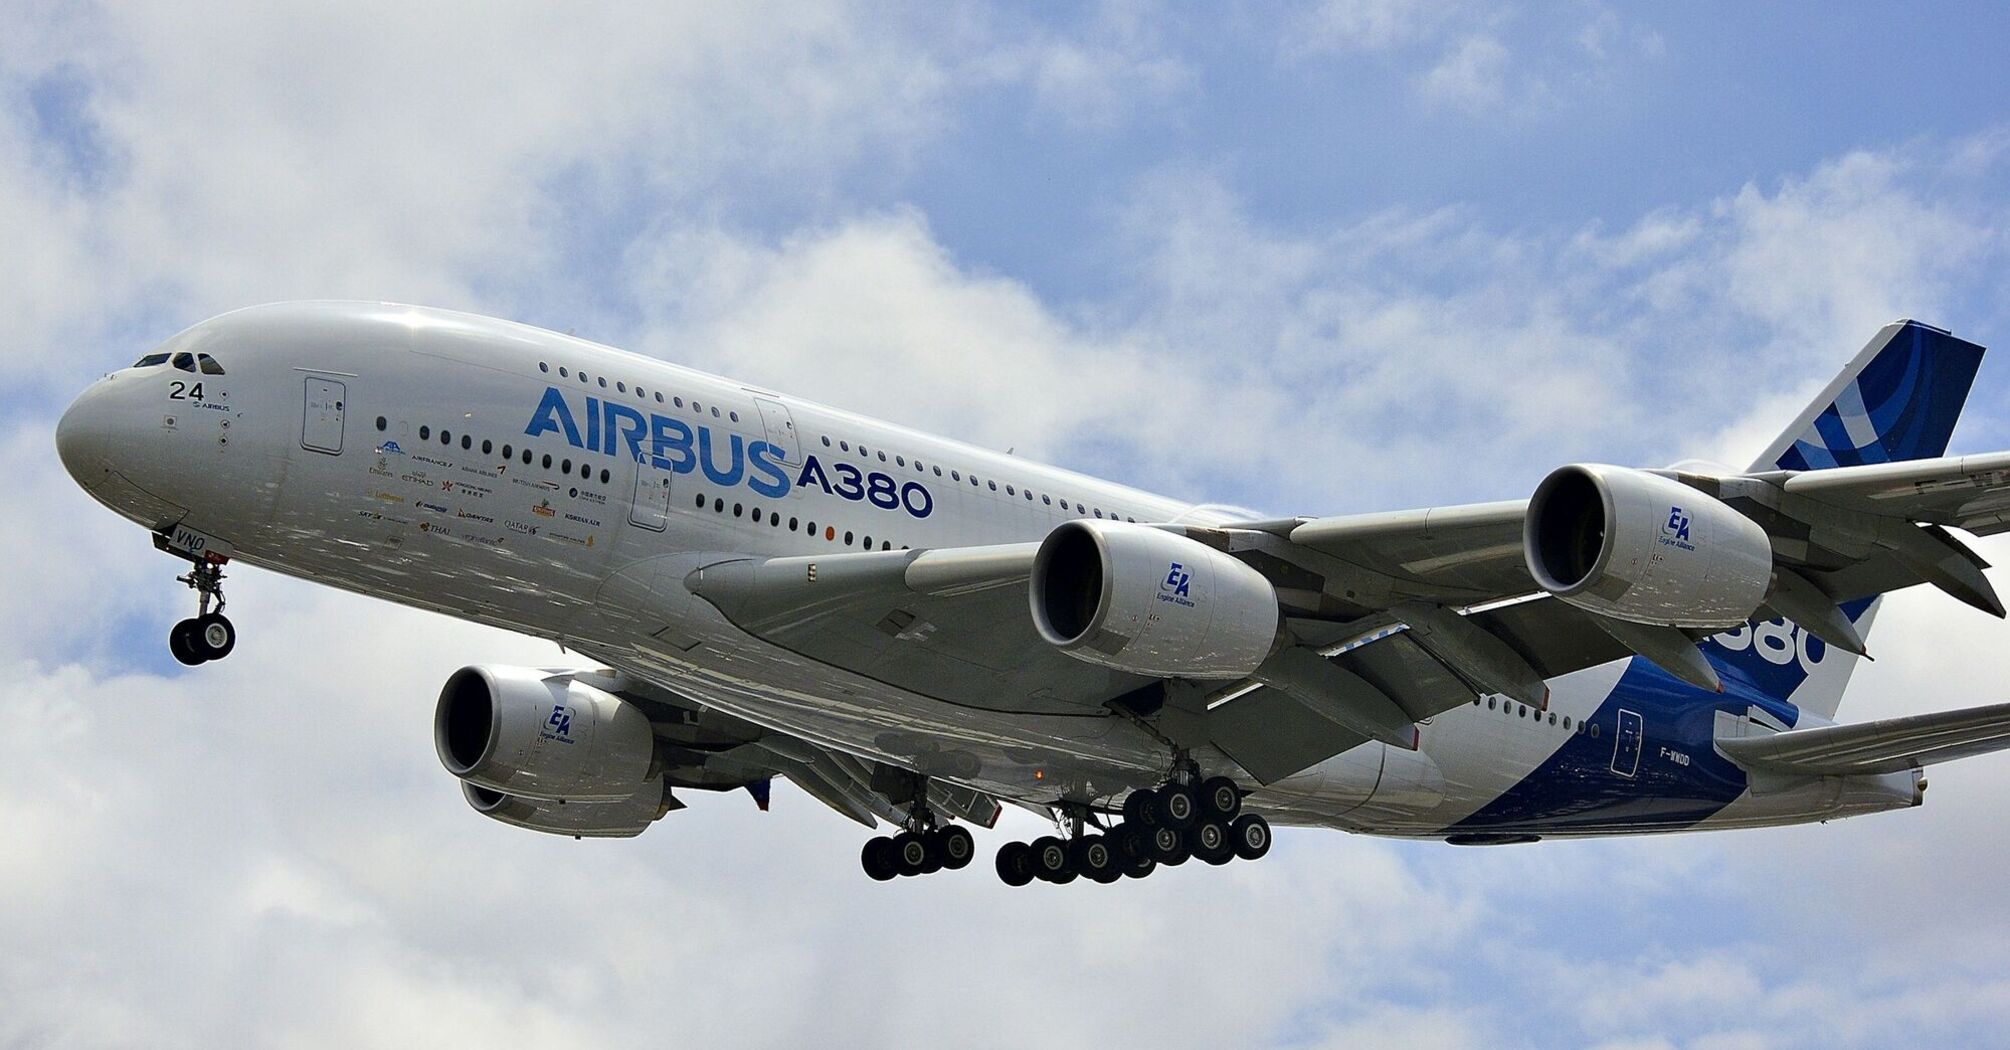 Airbus A380 in flight against a cloudy sky